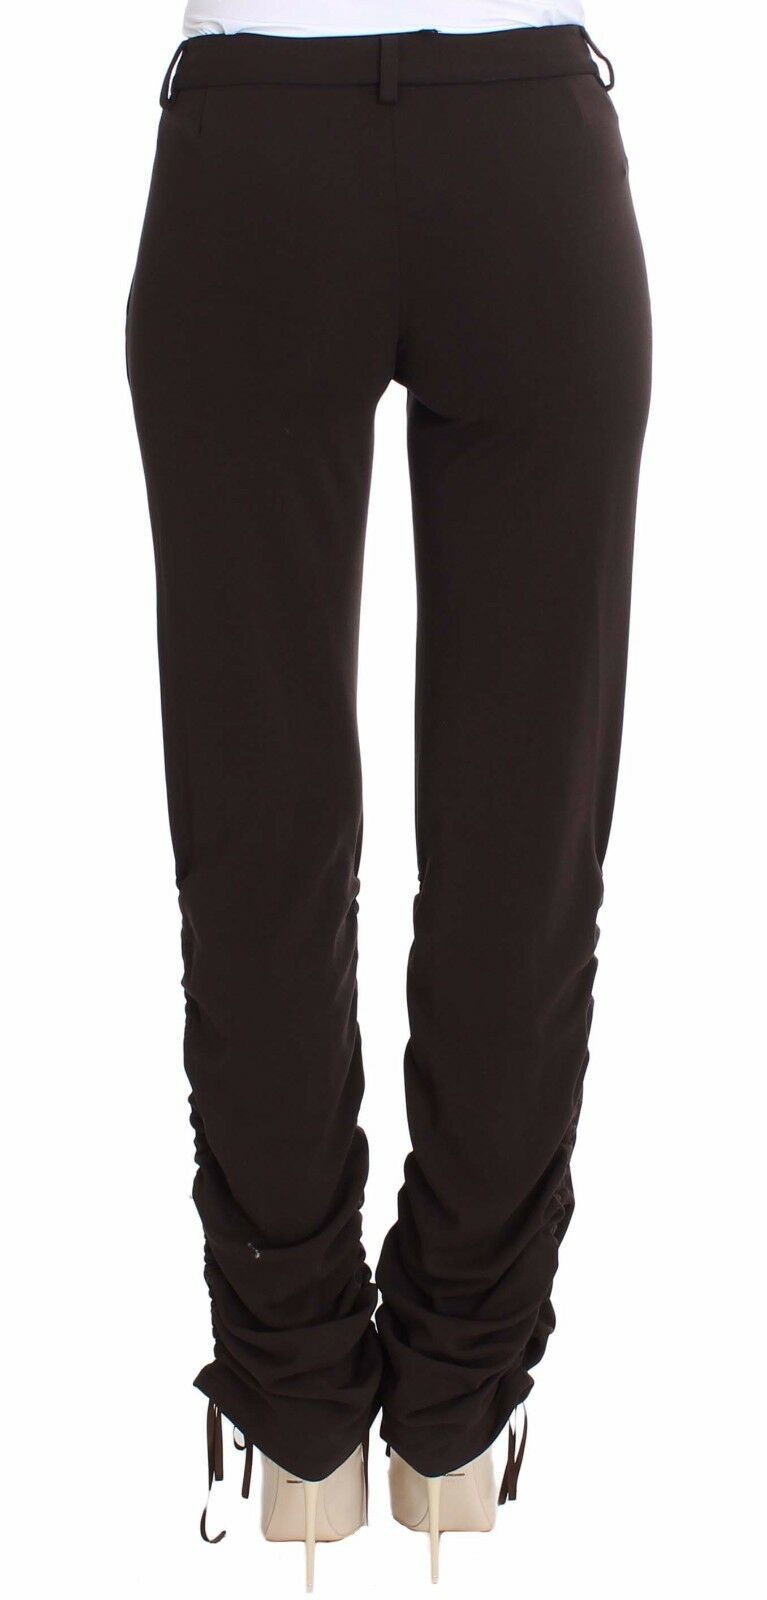 Ermanno Scervino Brown Stretch Casual Trousers Pants